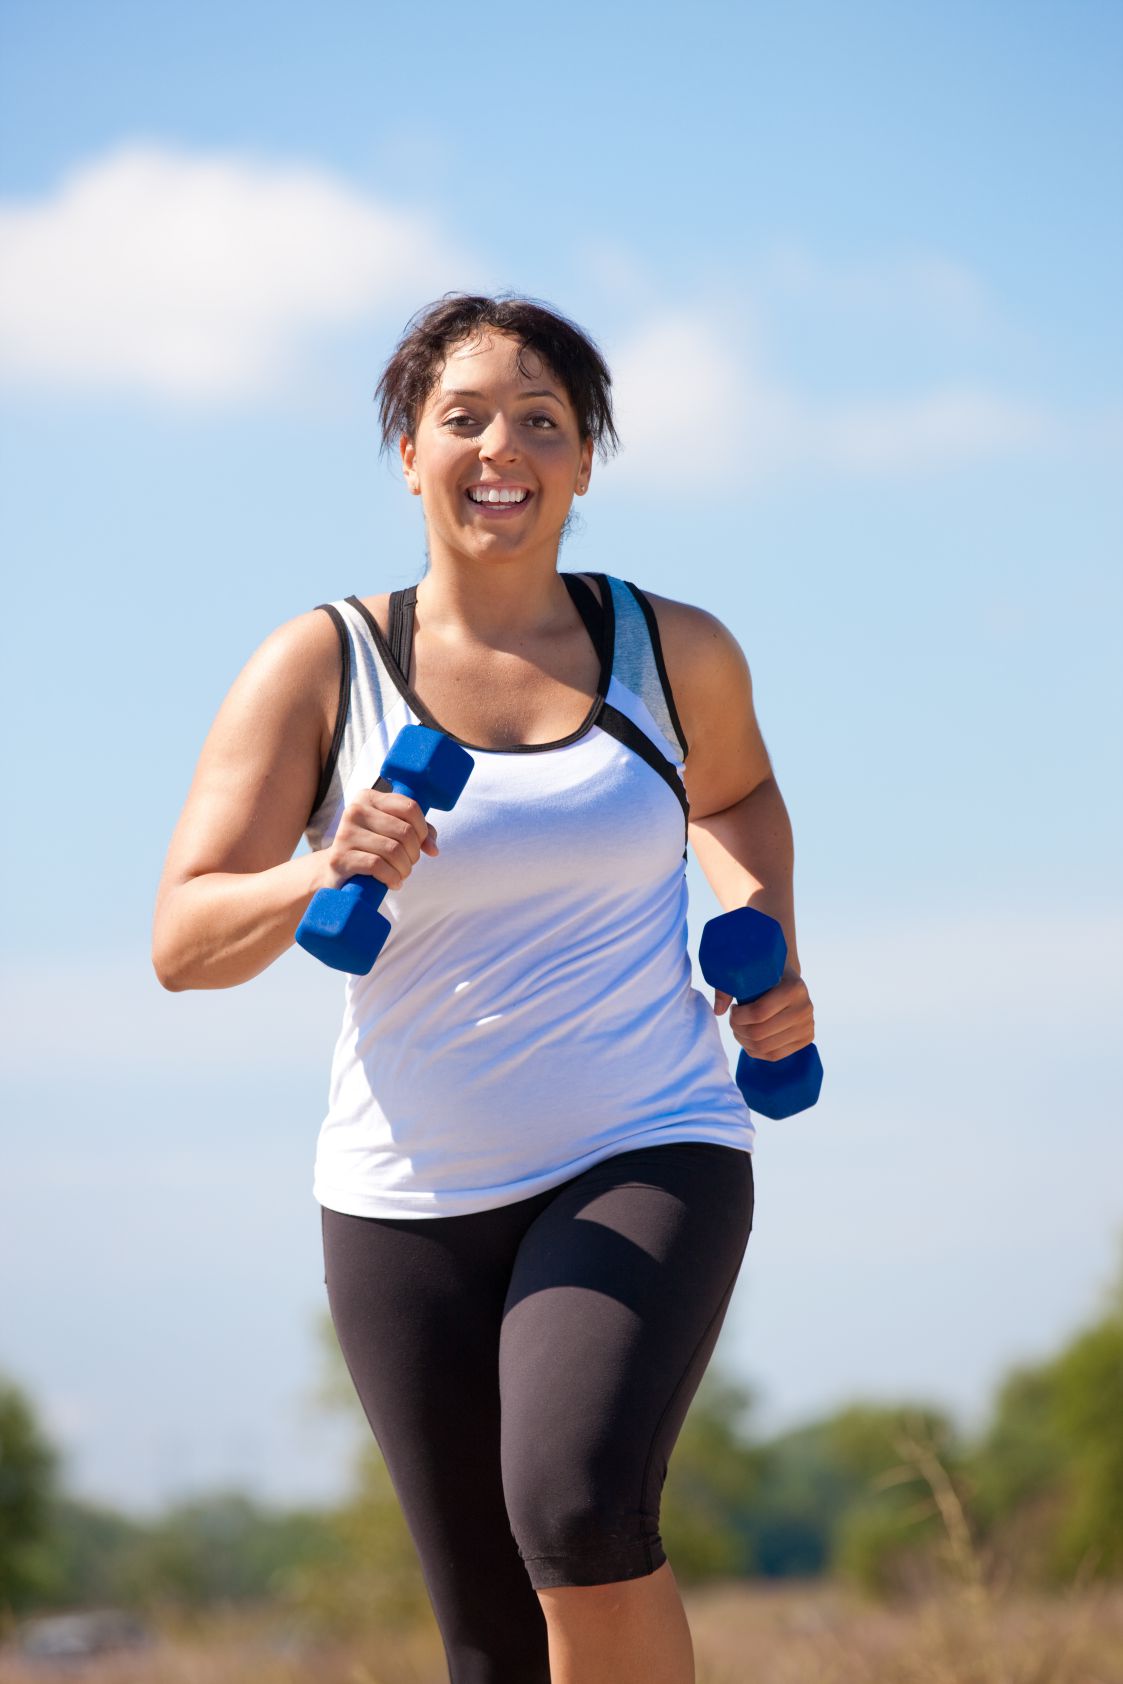 Plus Size Female Exercise Outdoor Happy Smile Under Sunny Blue Sky